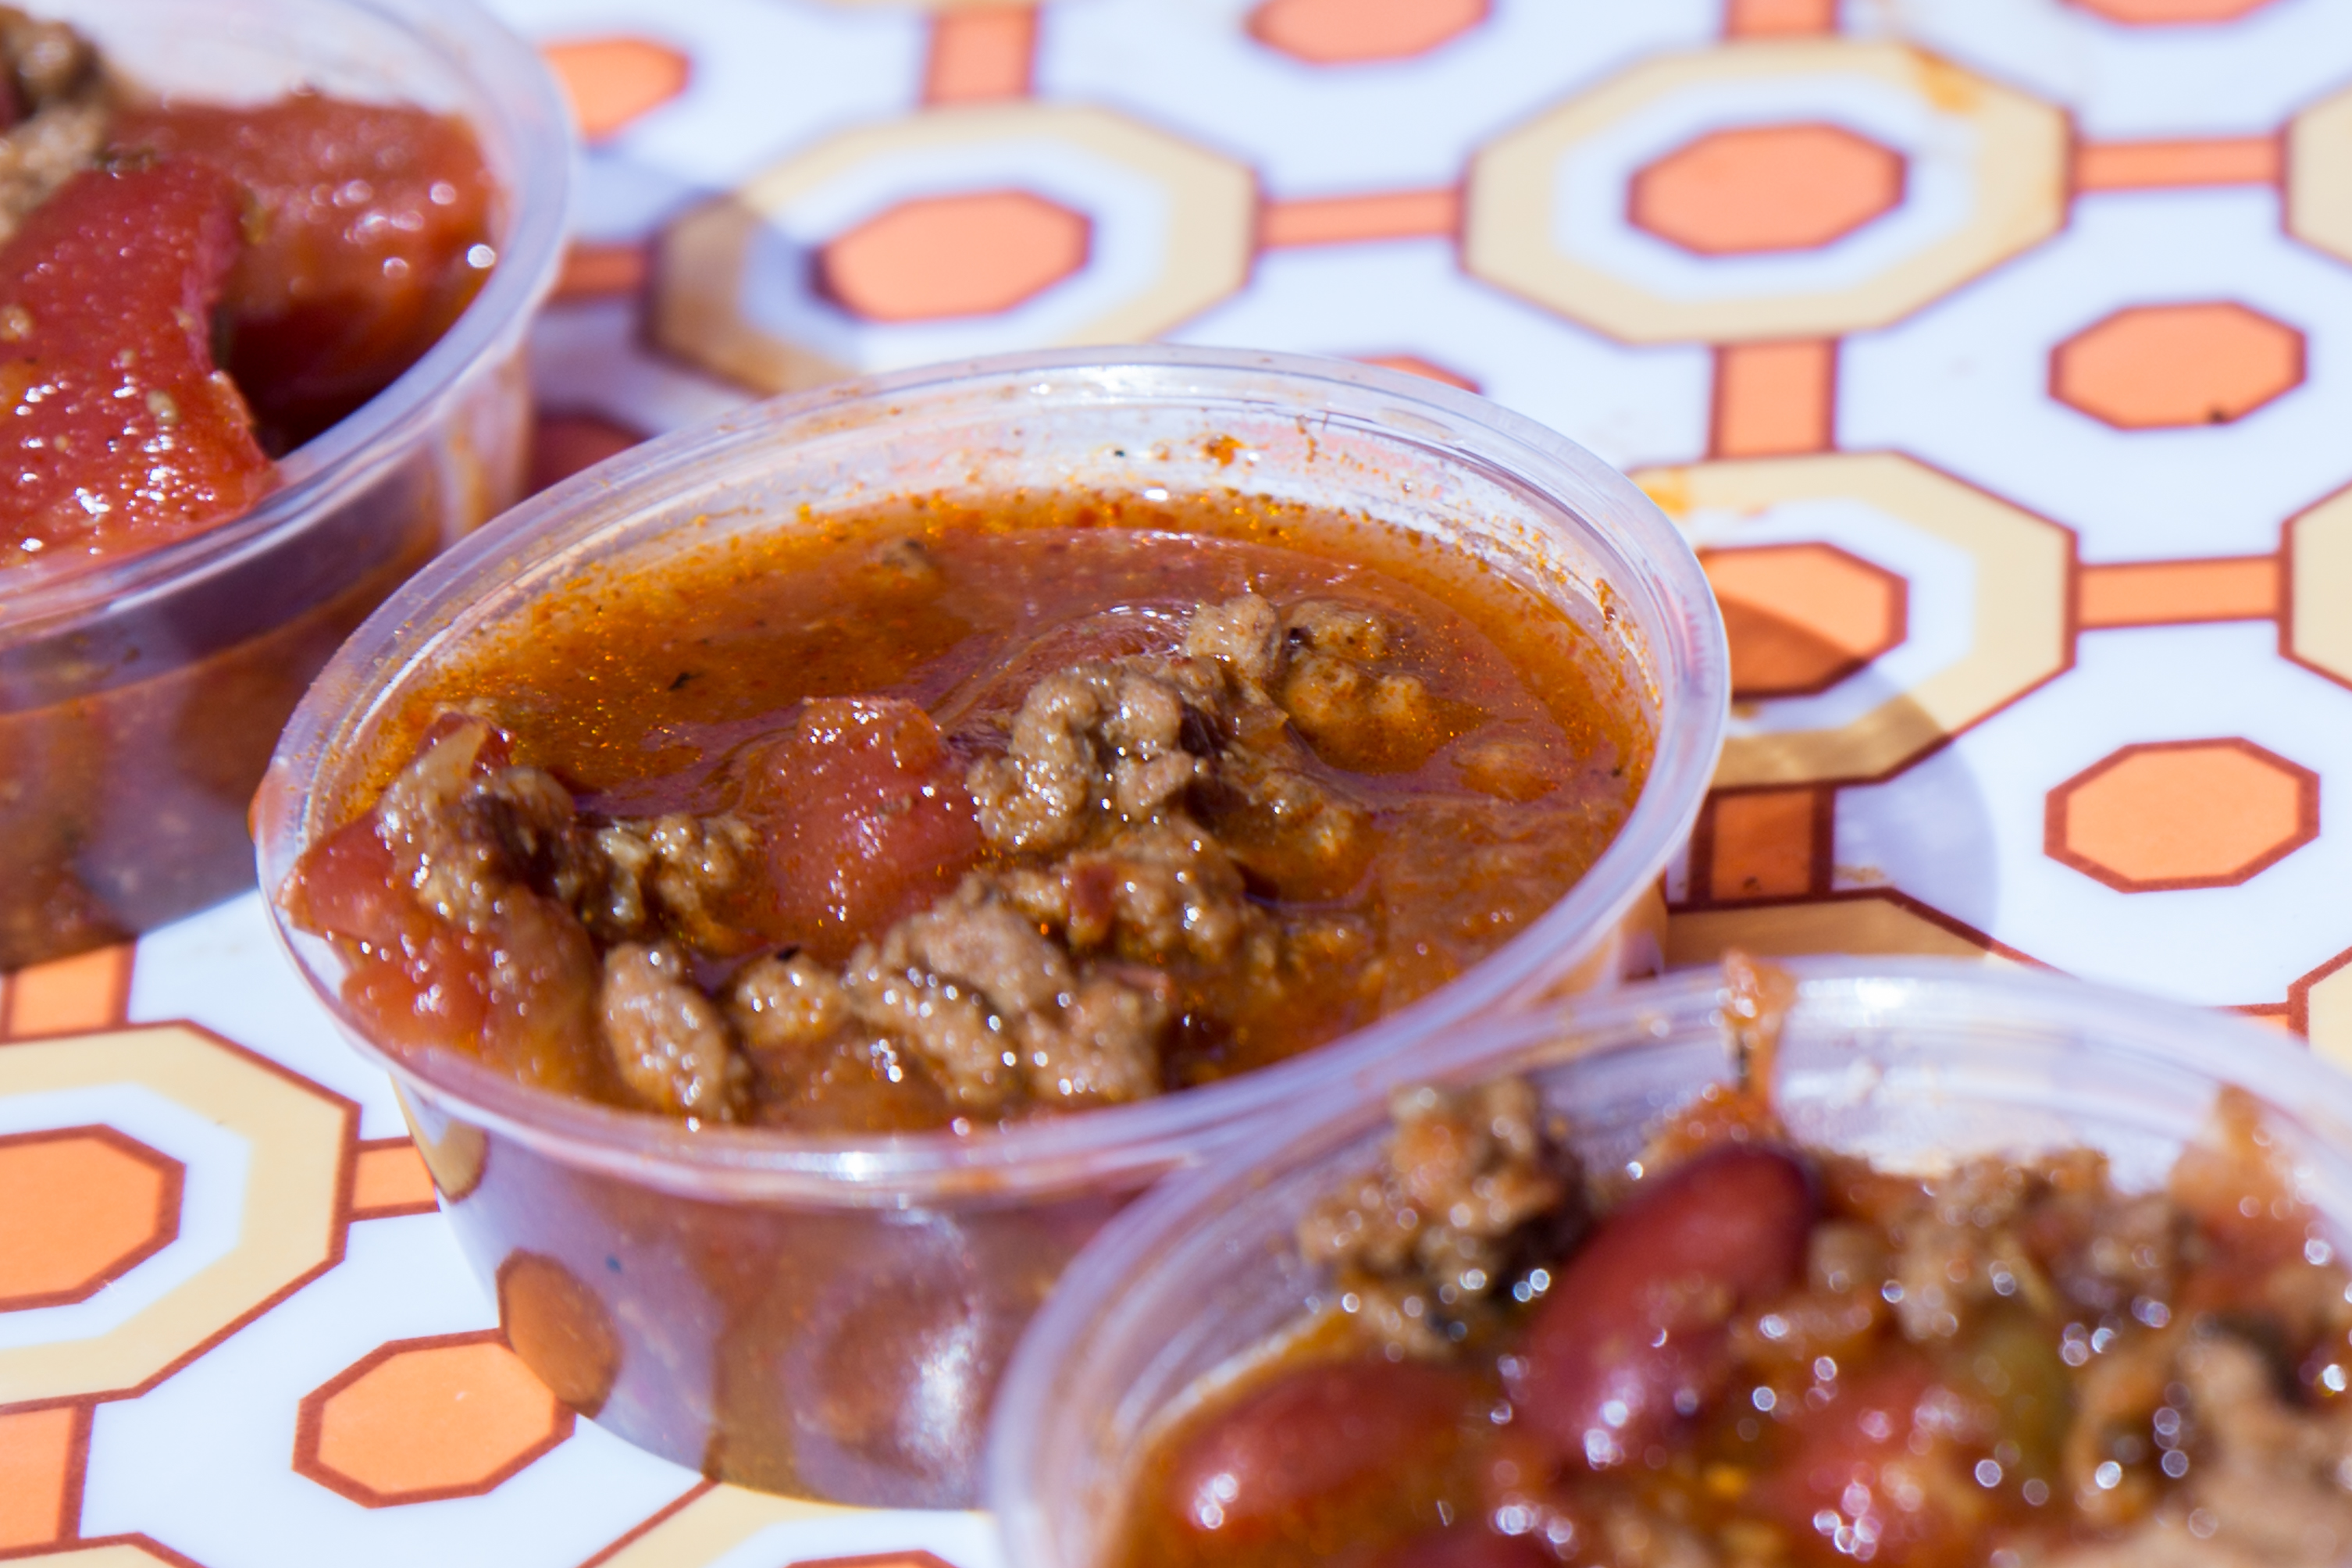 Heat Up Your October with The Atlanta Chili Cook Off ​